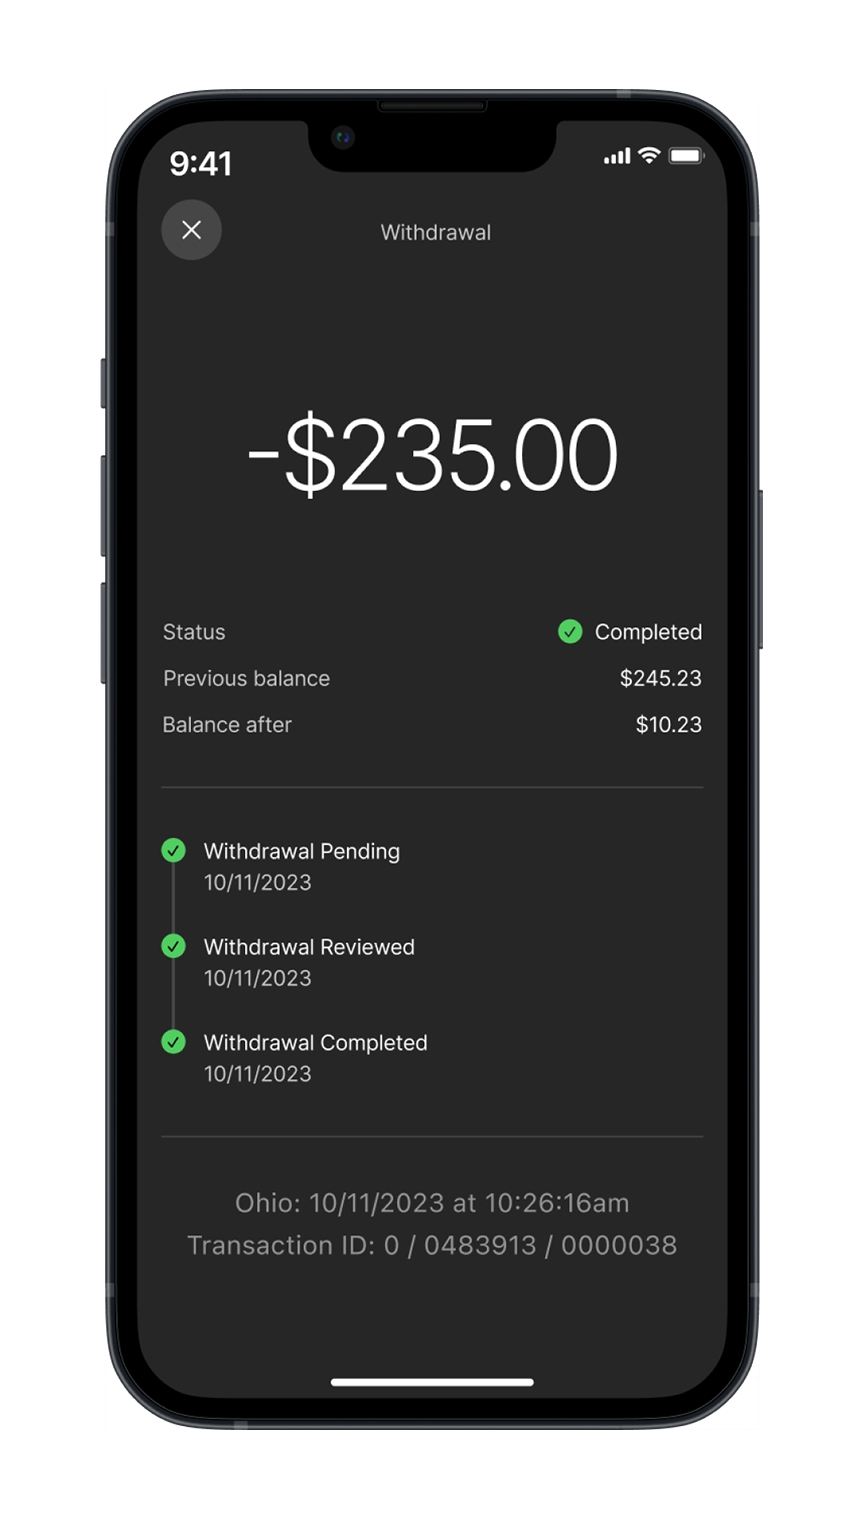 Withdrawal tracker - showing withdrawal steps and status